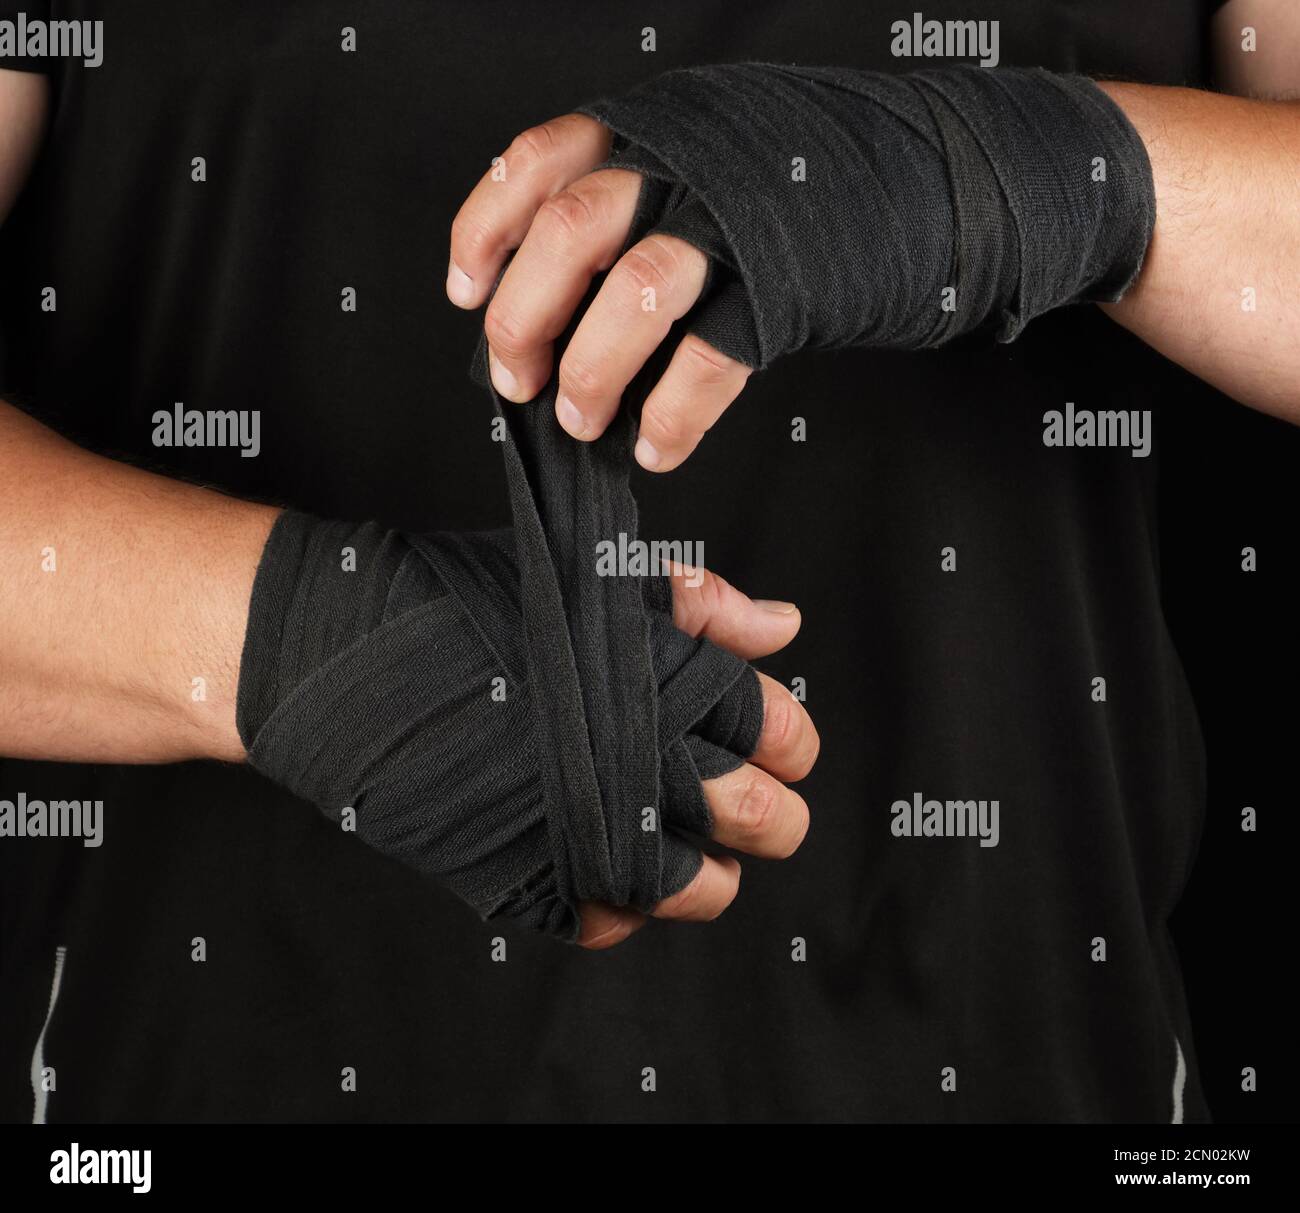 adult athlete stand in black clothes and wrap his hands in black textile elastic bandage Stock Photo